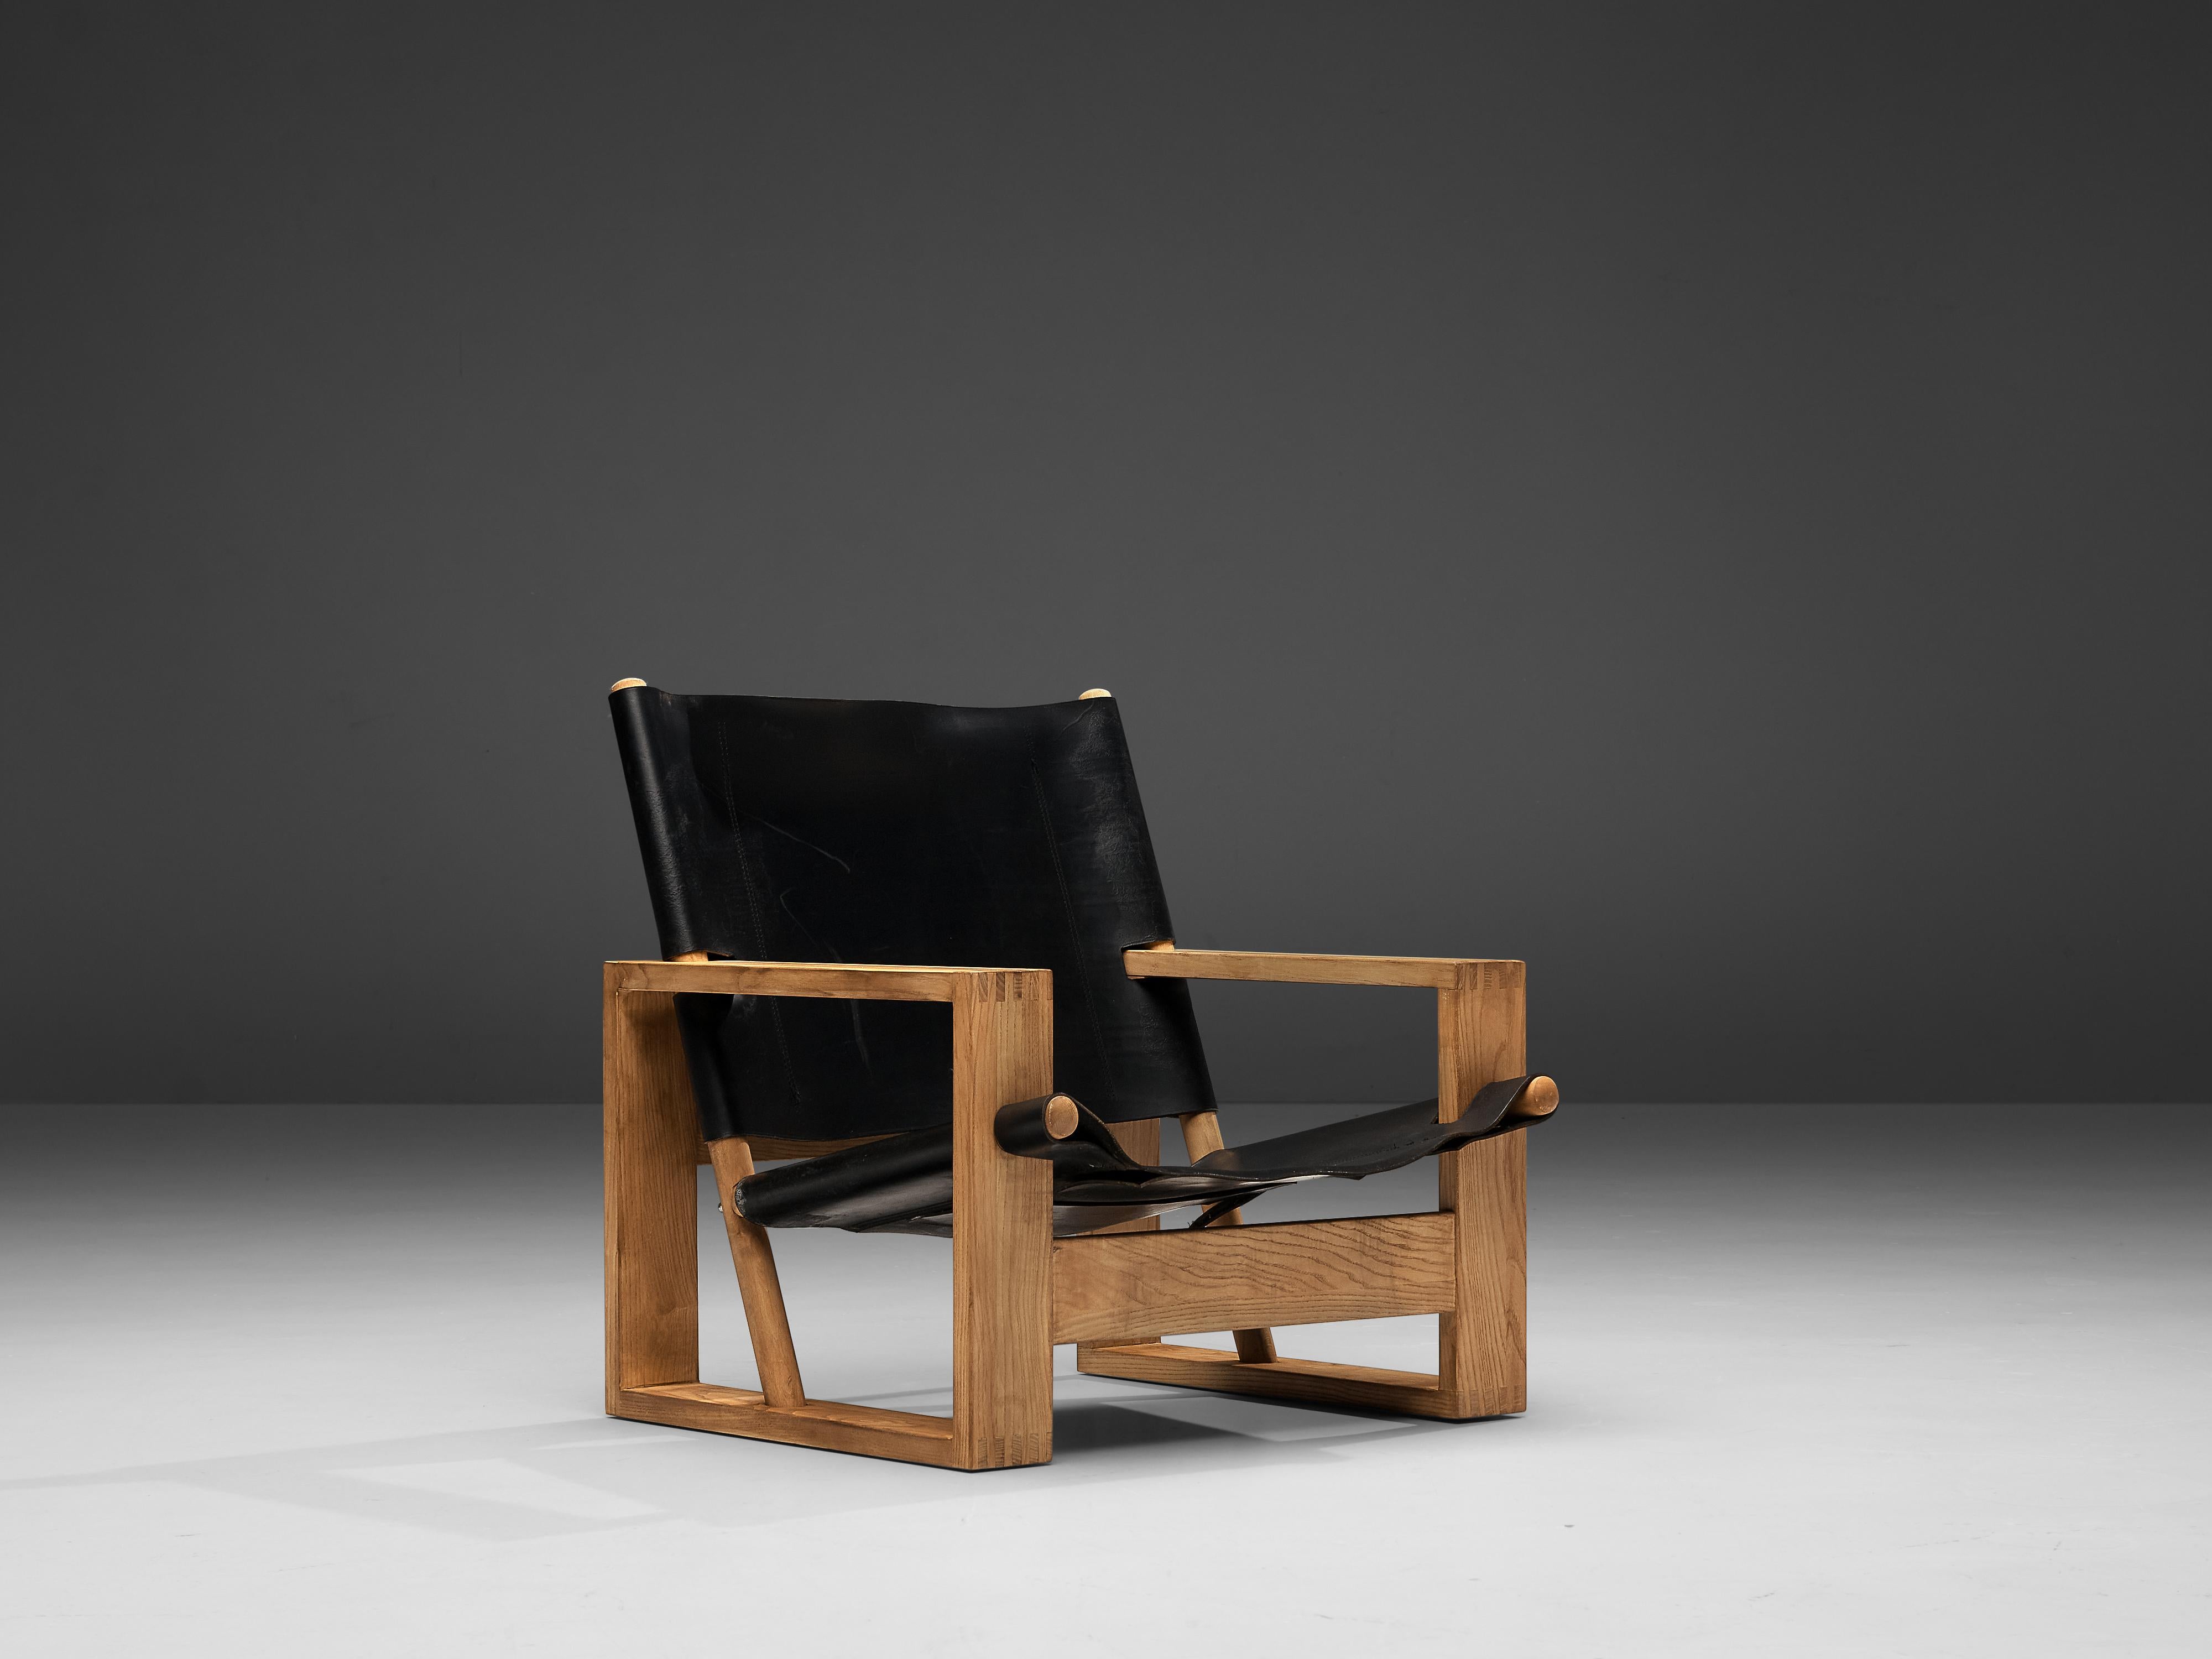 Ate van Apeldoorn for Houtwerk Hattem, ash, leather, the Netherlands, 1960s

The founder of Houtwerk Hattem, Ate van Apeldoorn, designed this lounge chair in the early 1960s. It features high-quality craftsmanship that can be seen at the wood